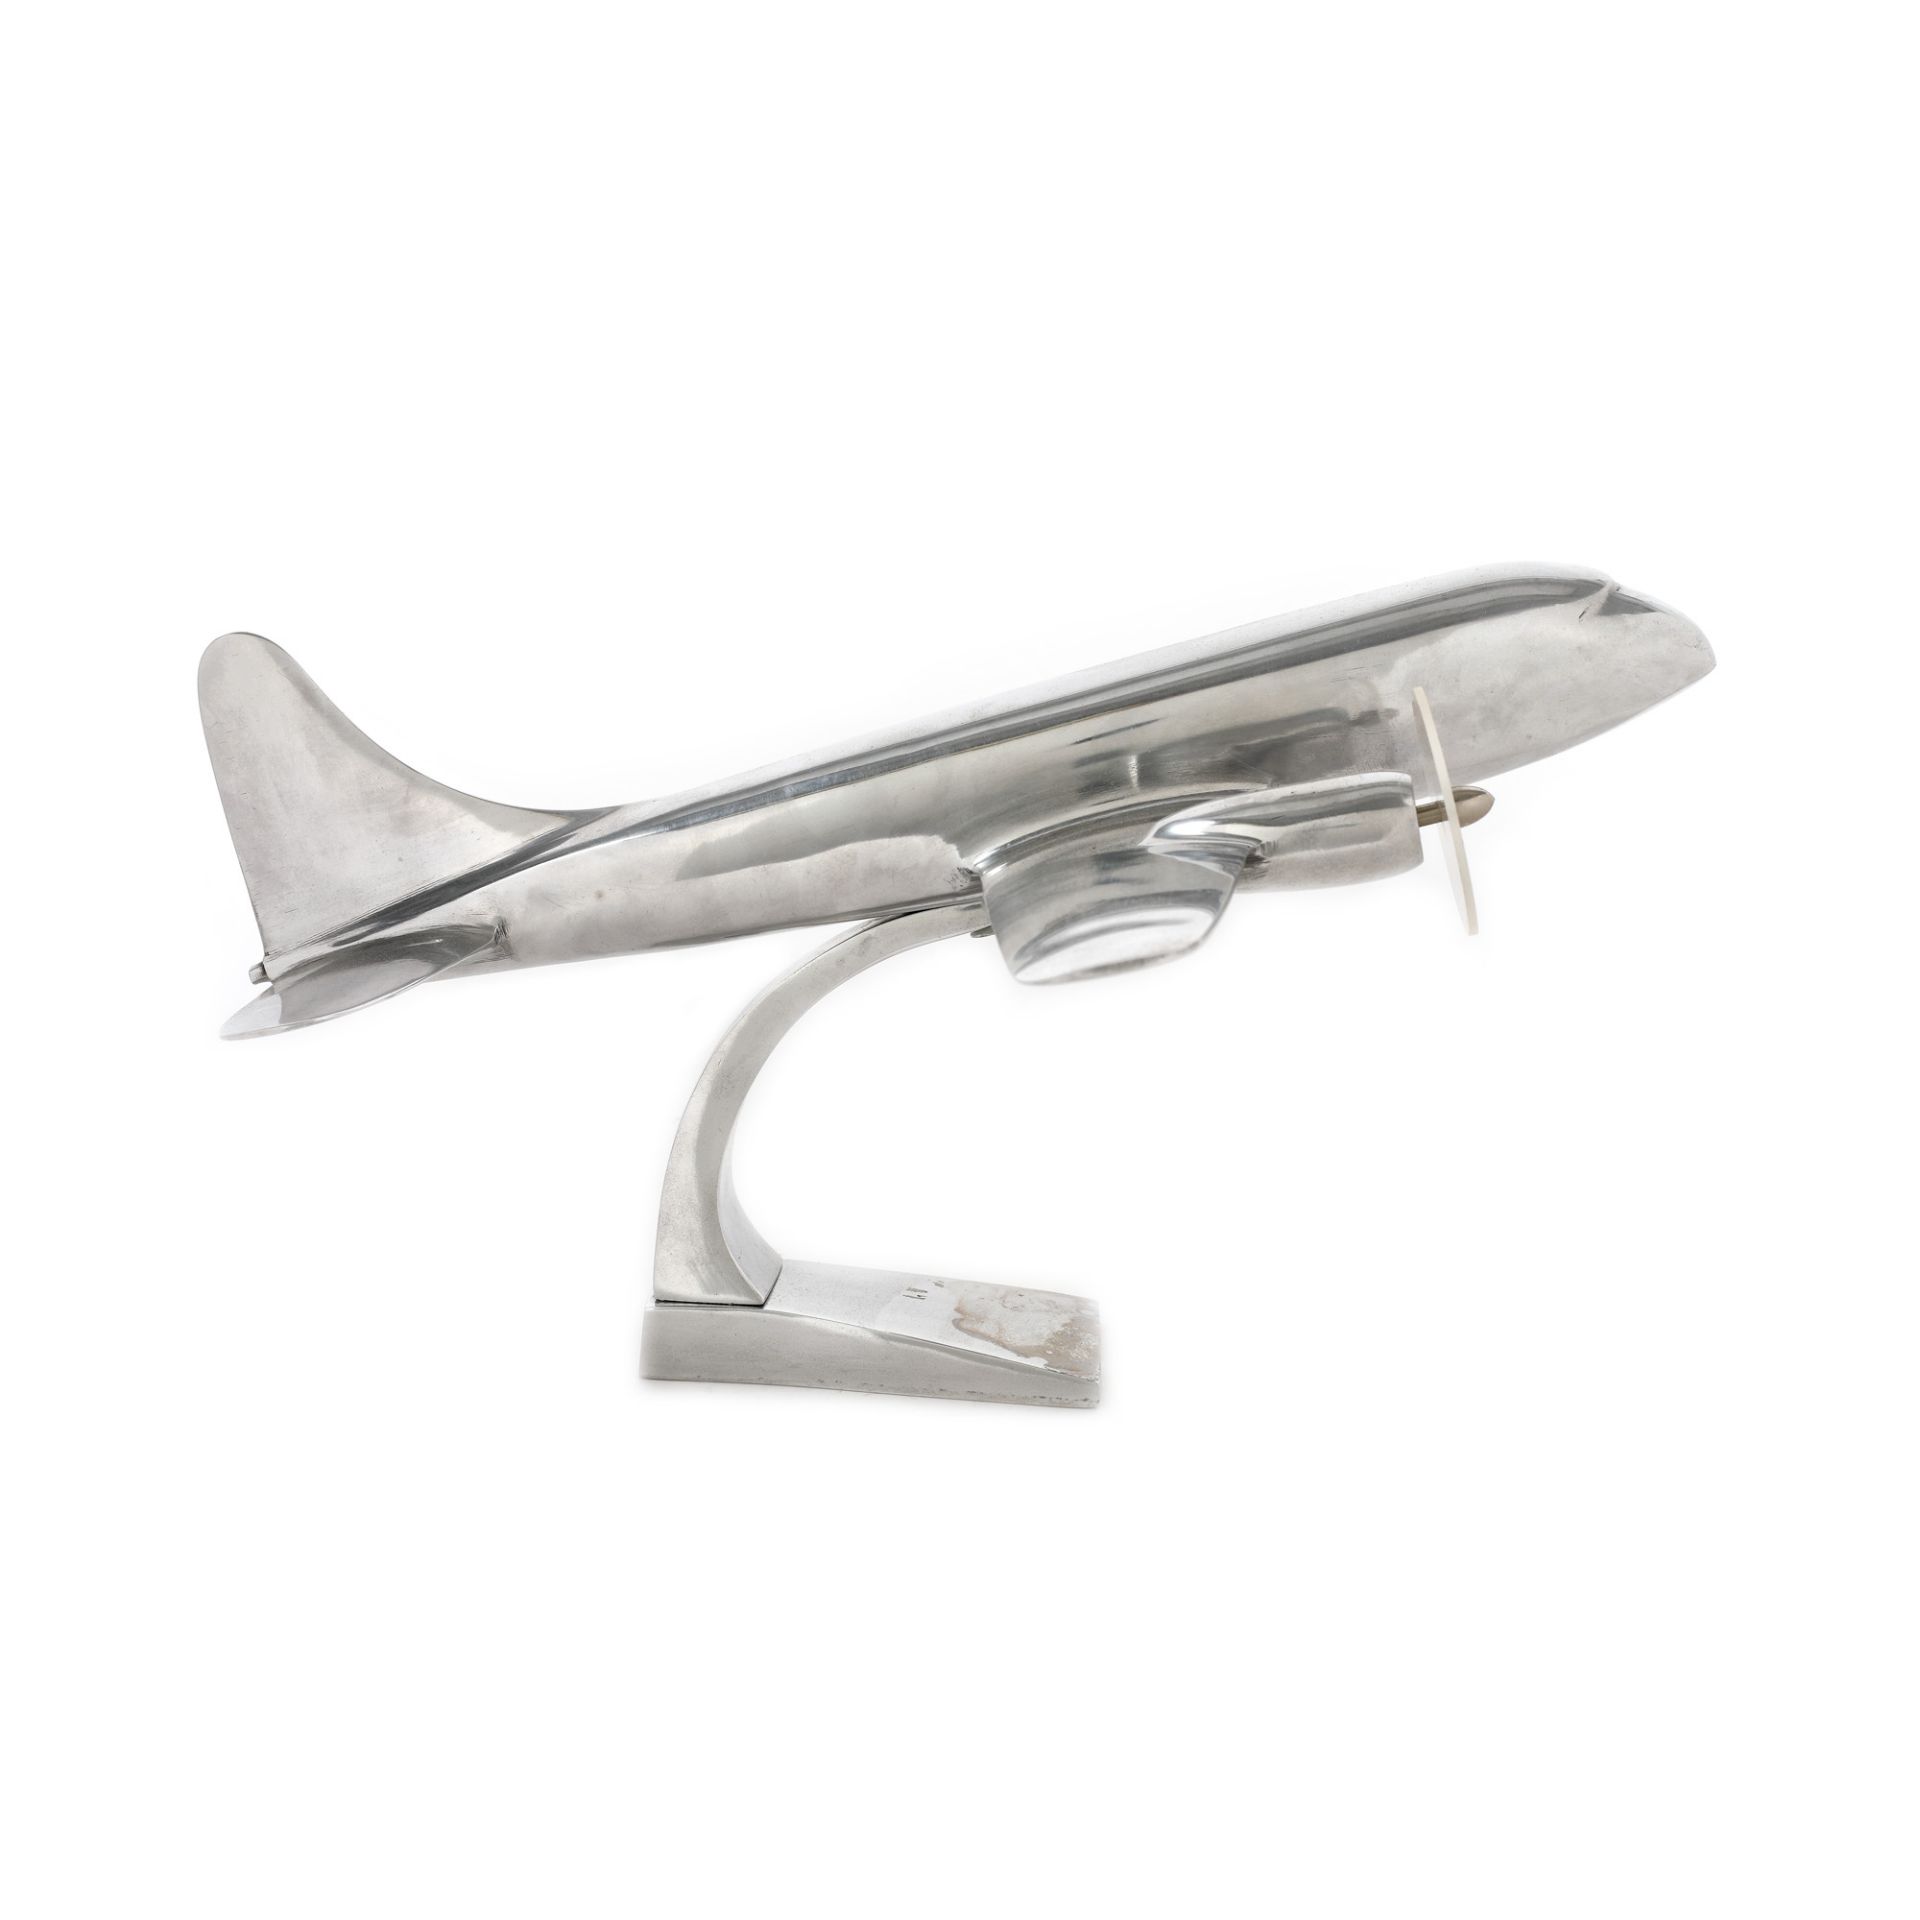 Aircraft model, United States of America, middle 20th century - Image 3 of 3